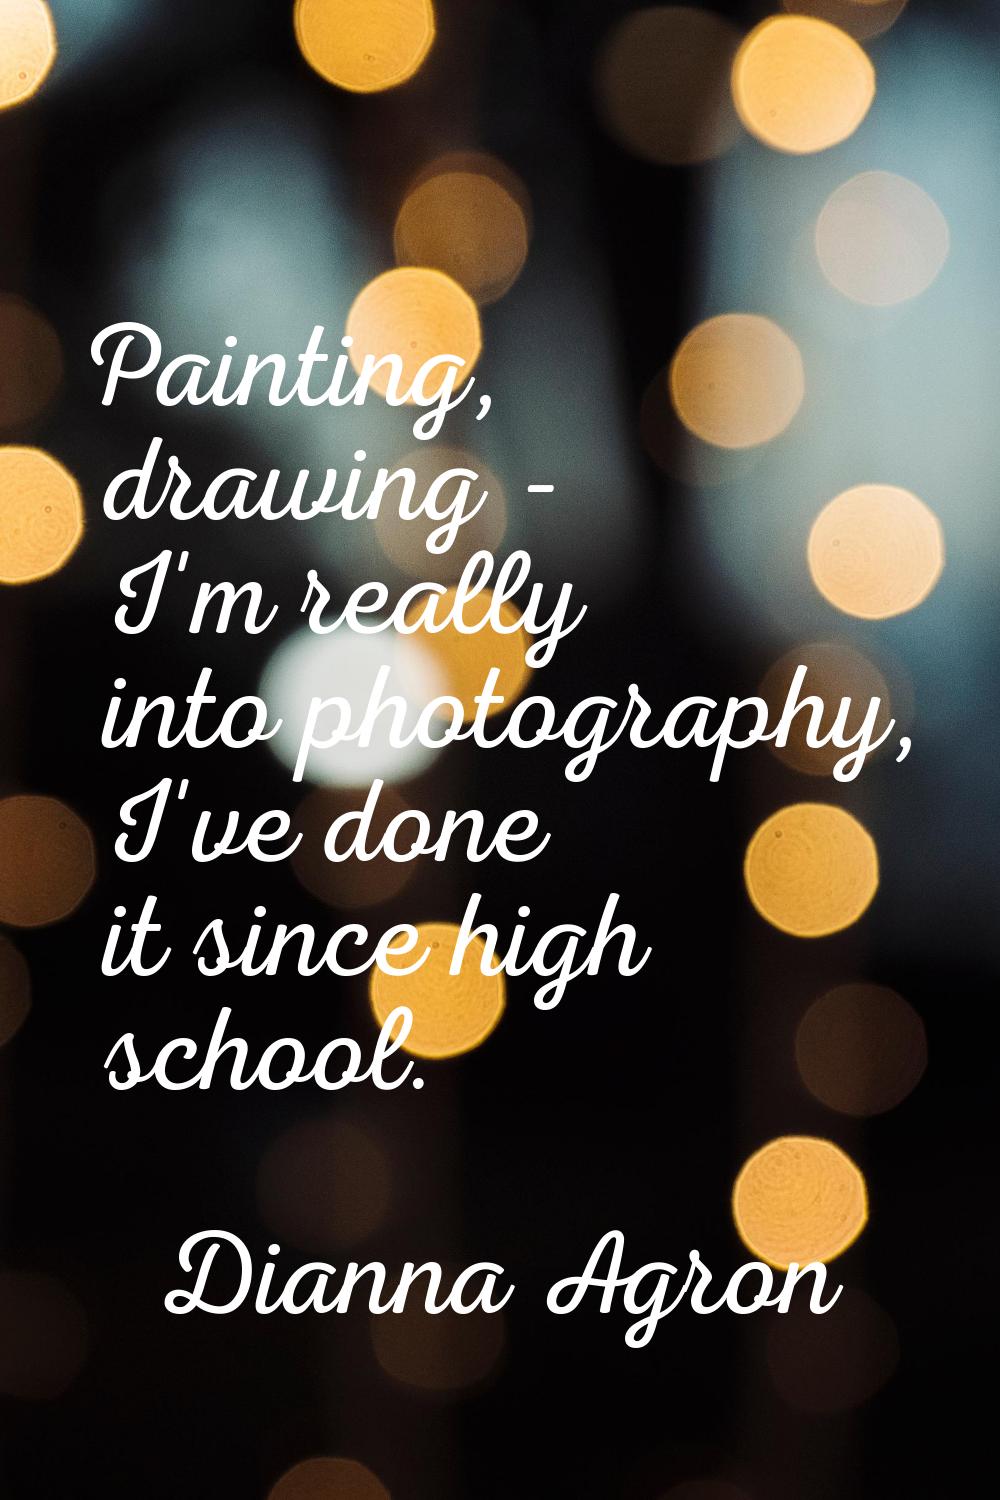 Painting, drawing - I'm really into photography, I've done it since high school.